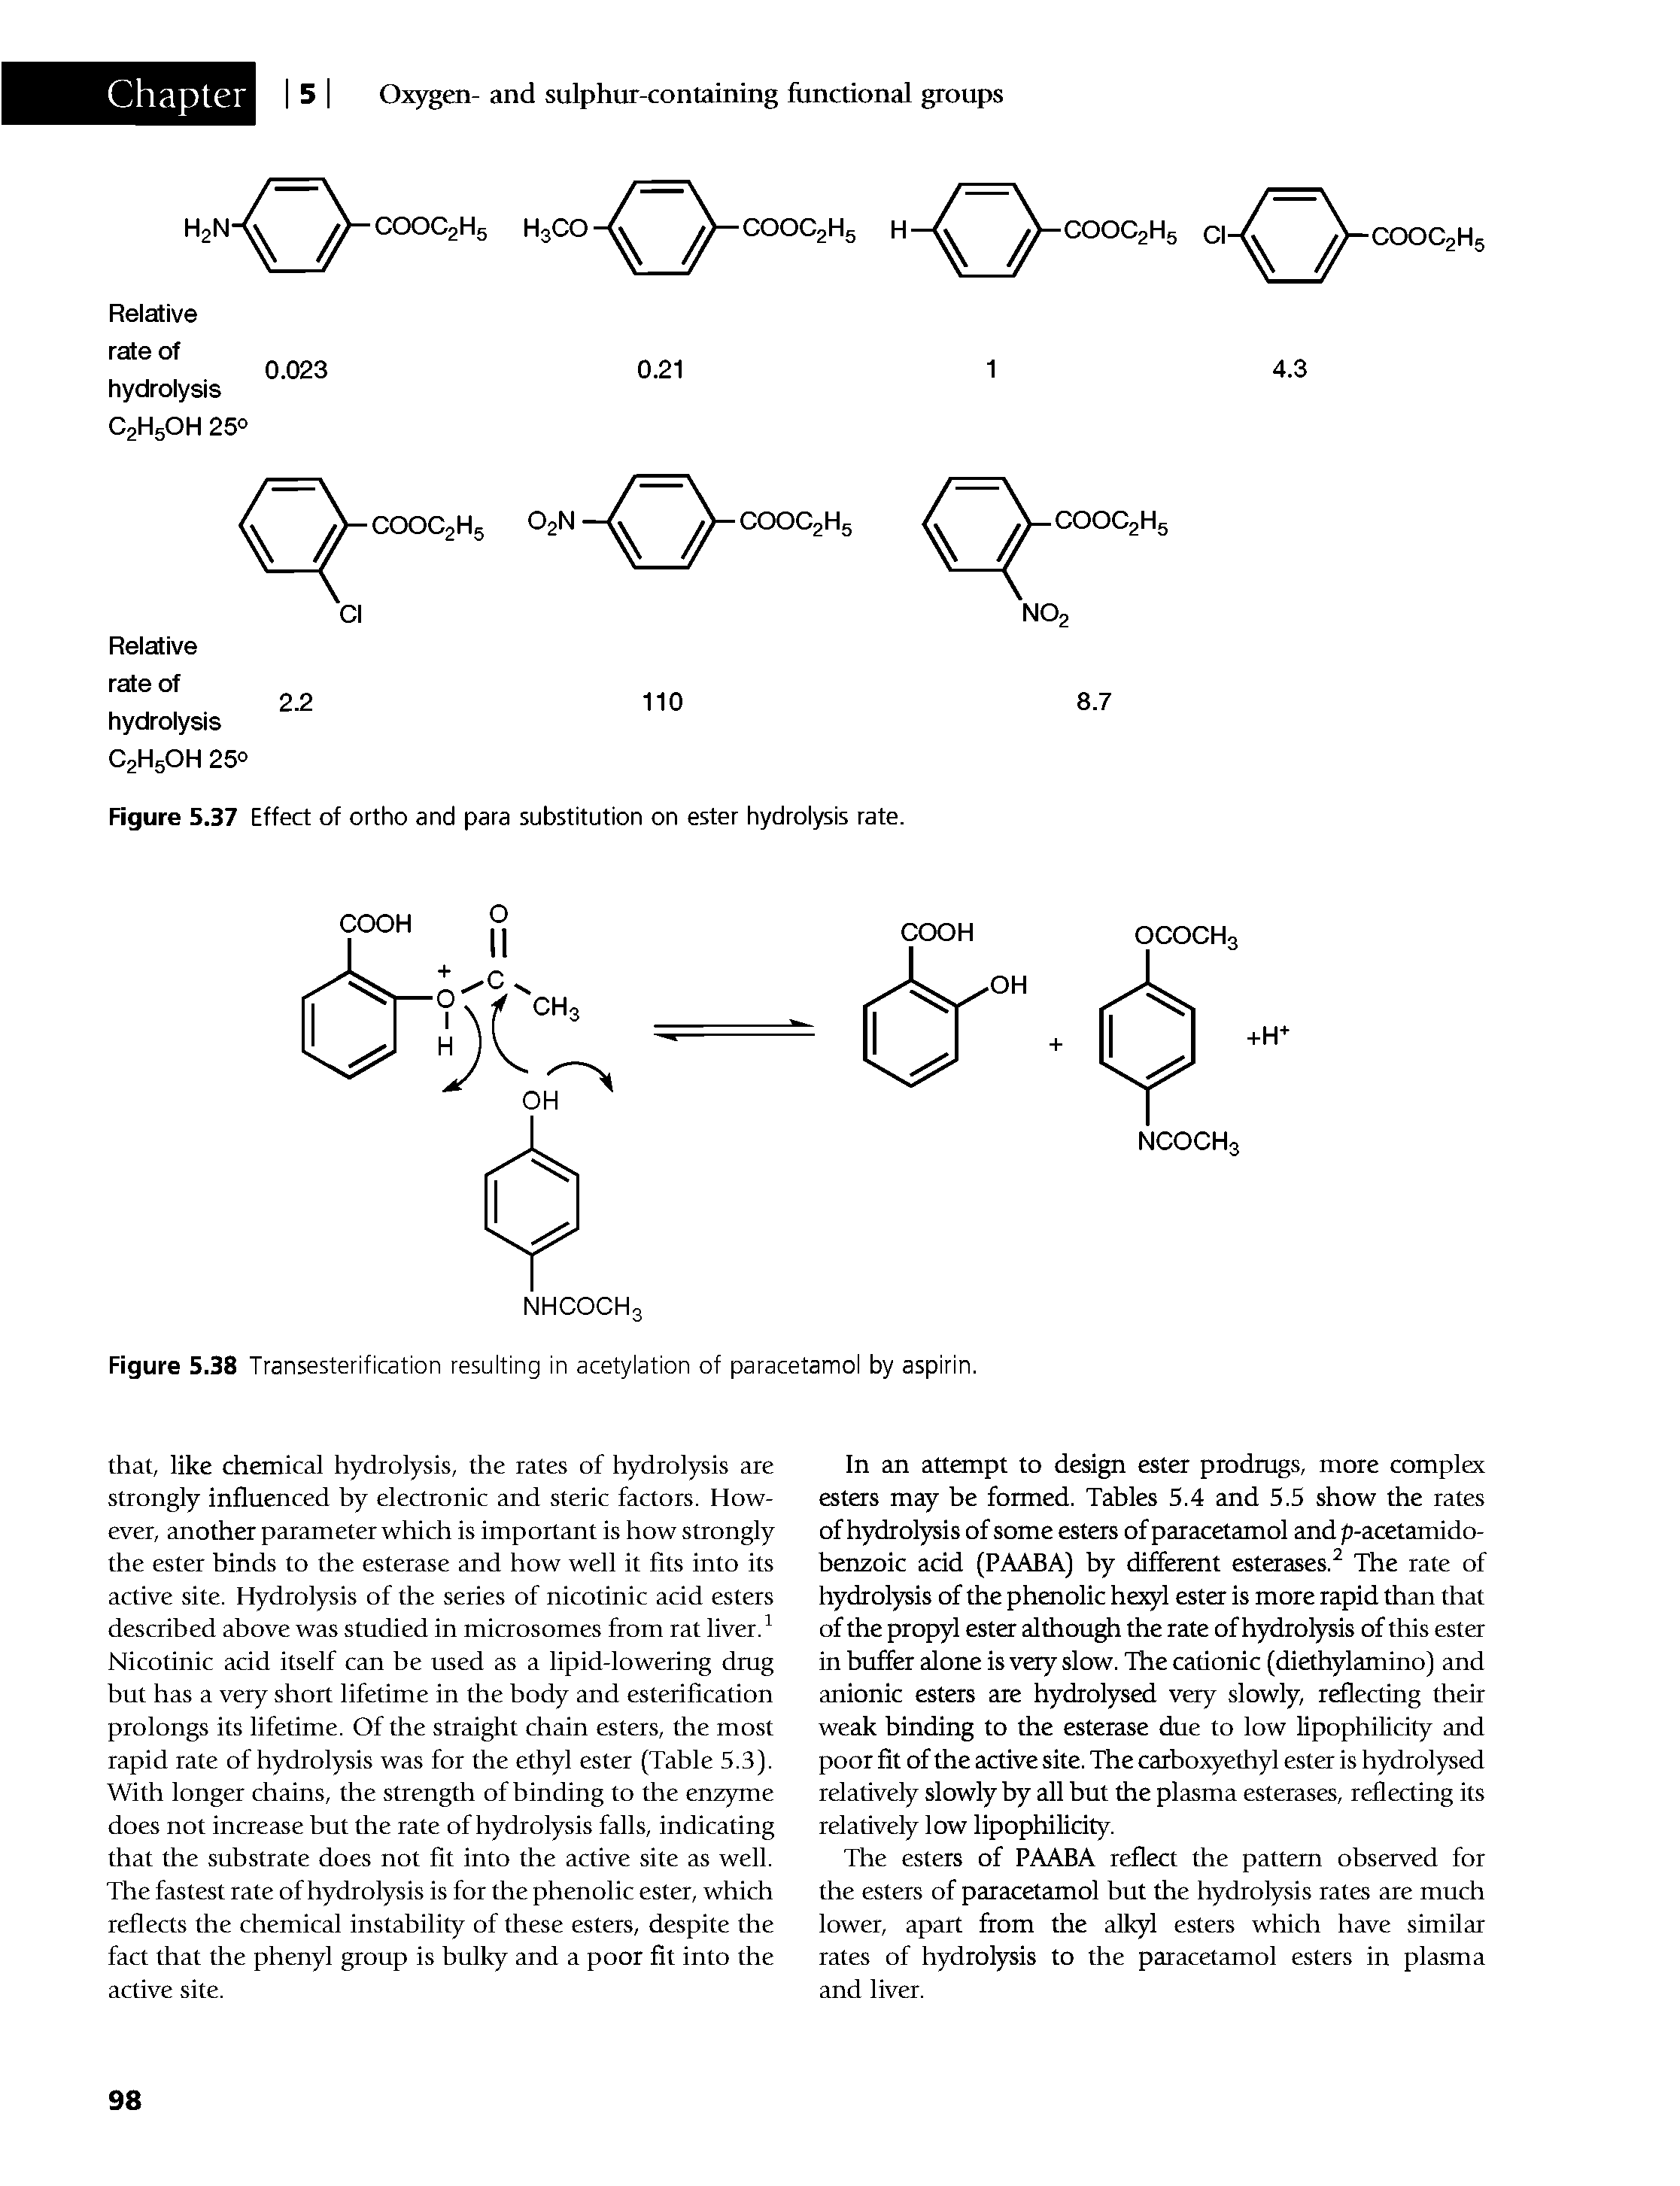 Figure 5.37 Effect of ortho and para substitution on ester hydrolysis rate.